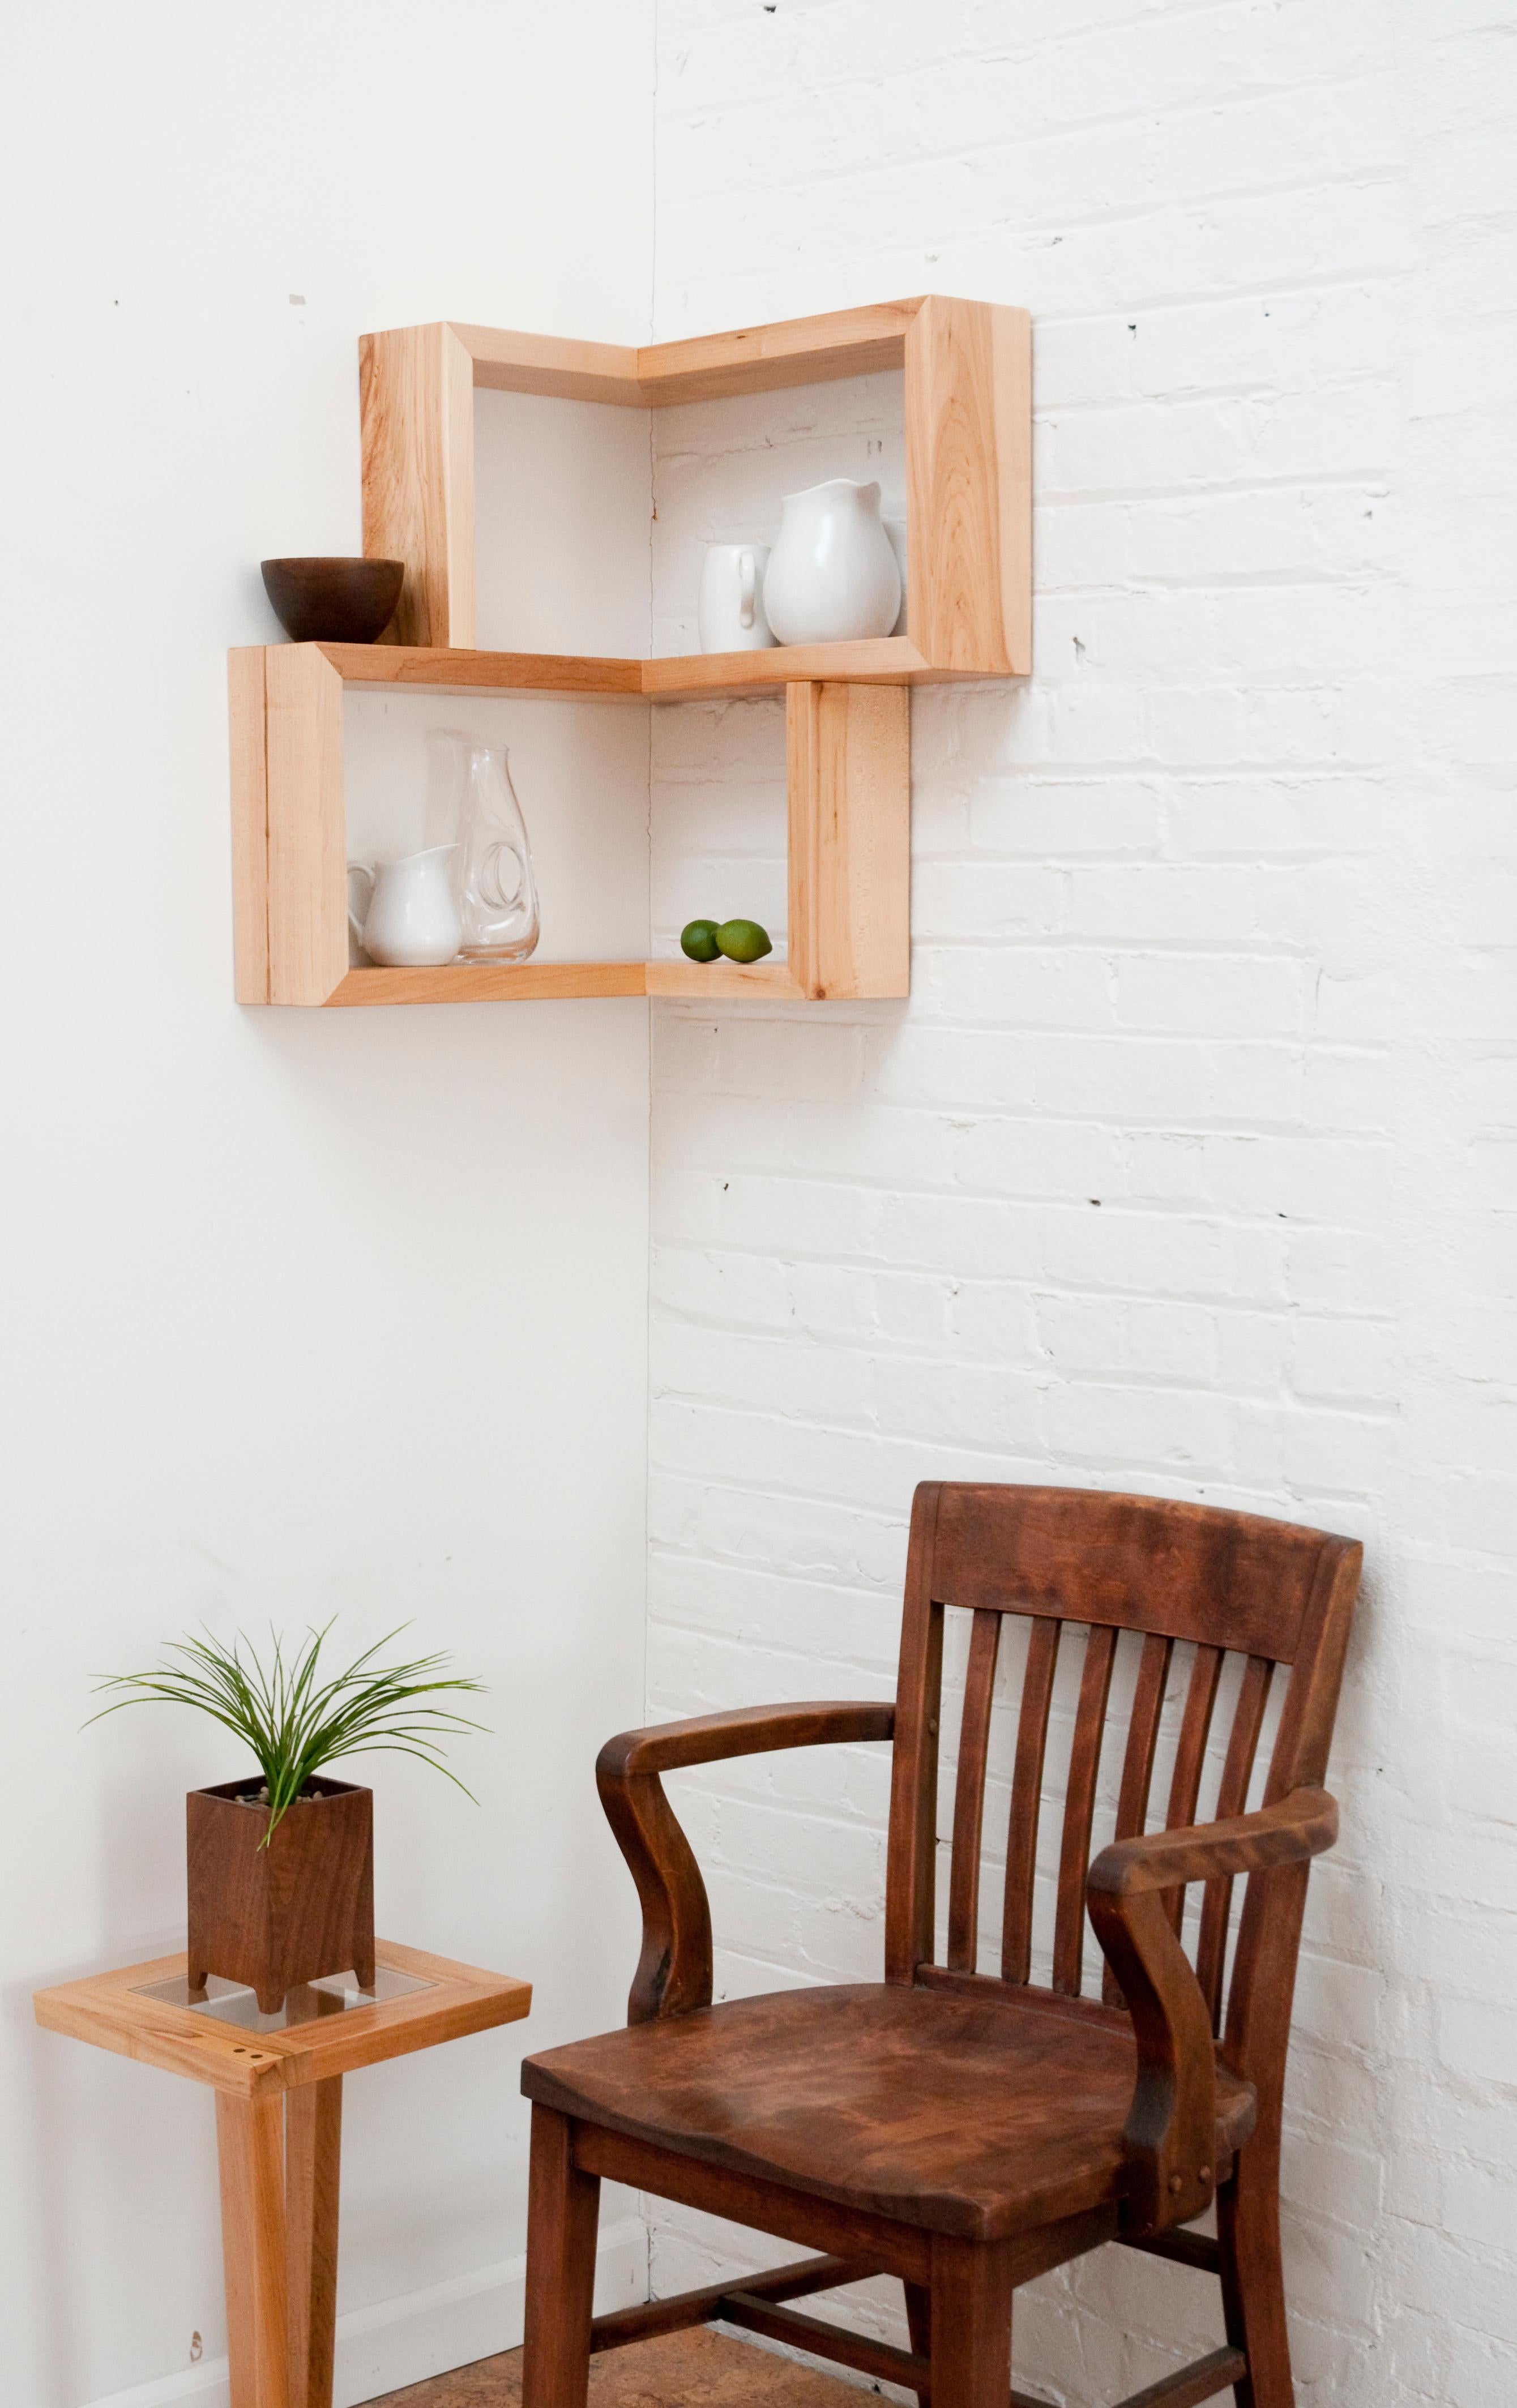 The award nominated Franklin Shelf is a 90 degree corner shelf. This unique design allows for maximum storage space, while occupying a very small area. The smooth wooden finish of this shelf will make a great addition to any corner, table, or